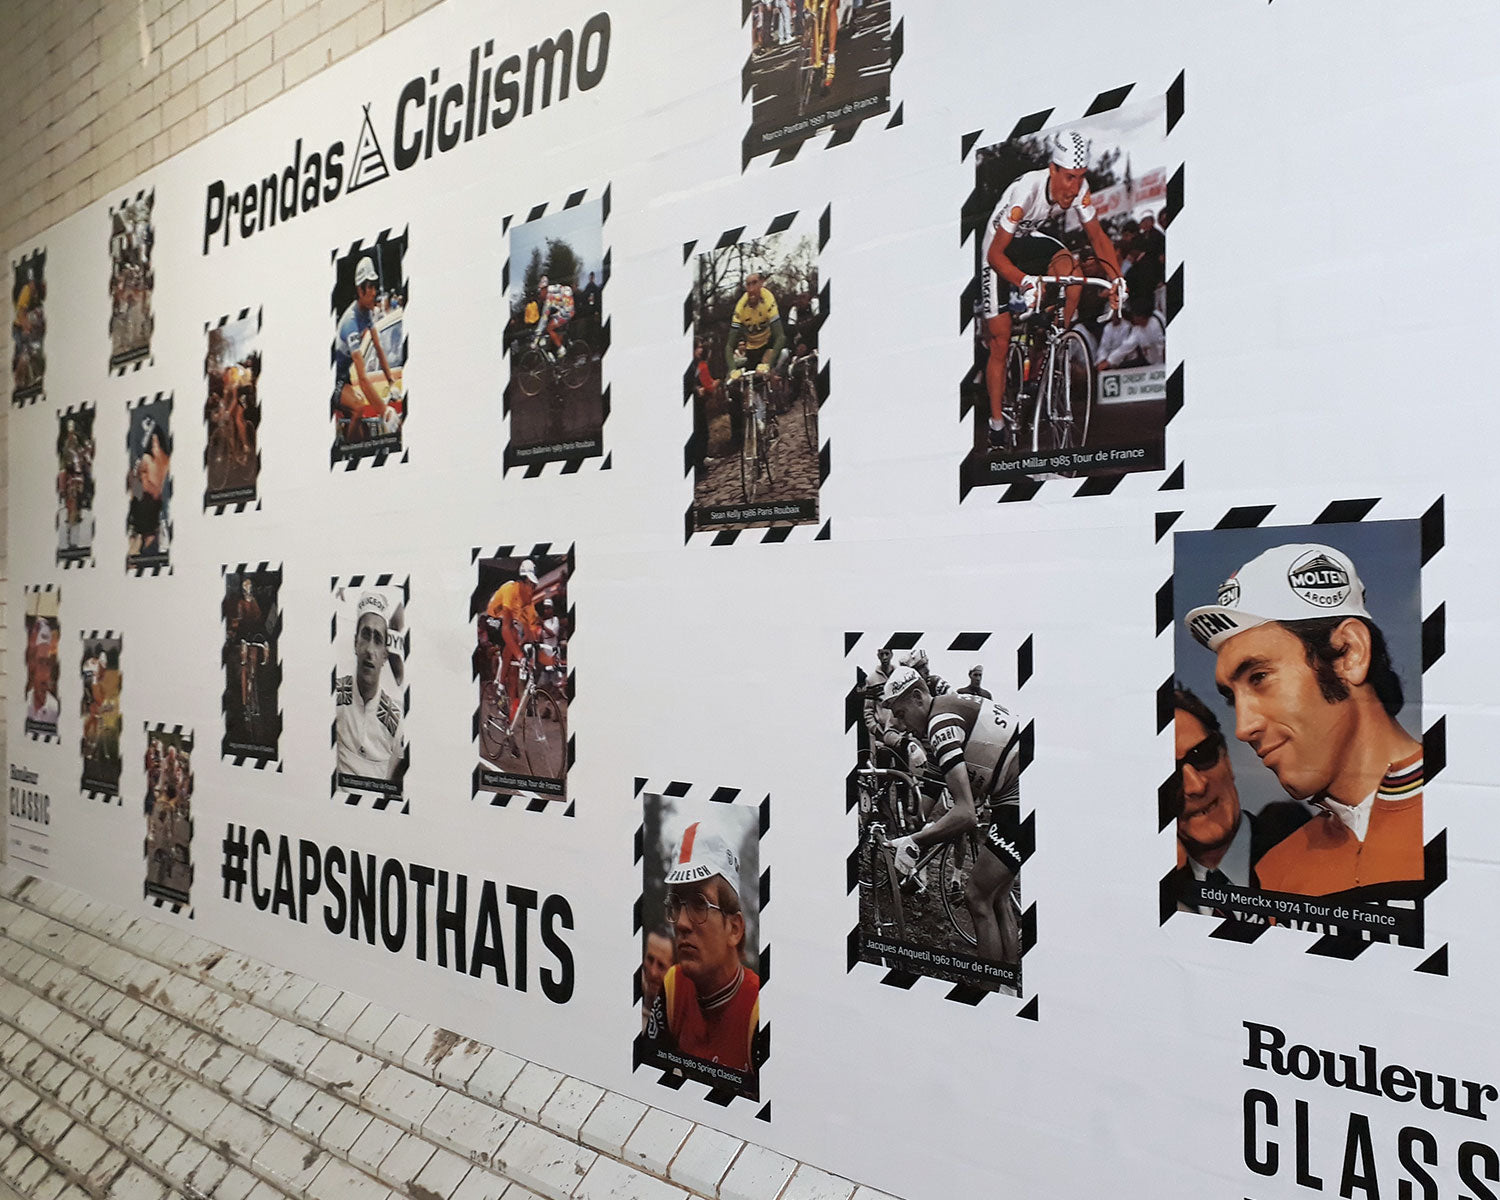 The Prendas #CapsNotHats Hall of Fame featured 20 riders wearing cotton cycling caps.